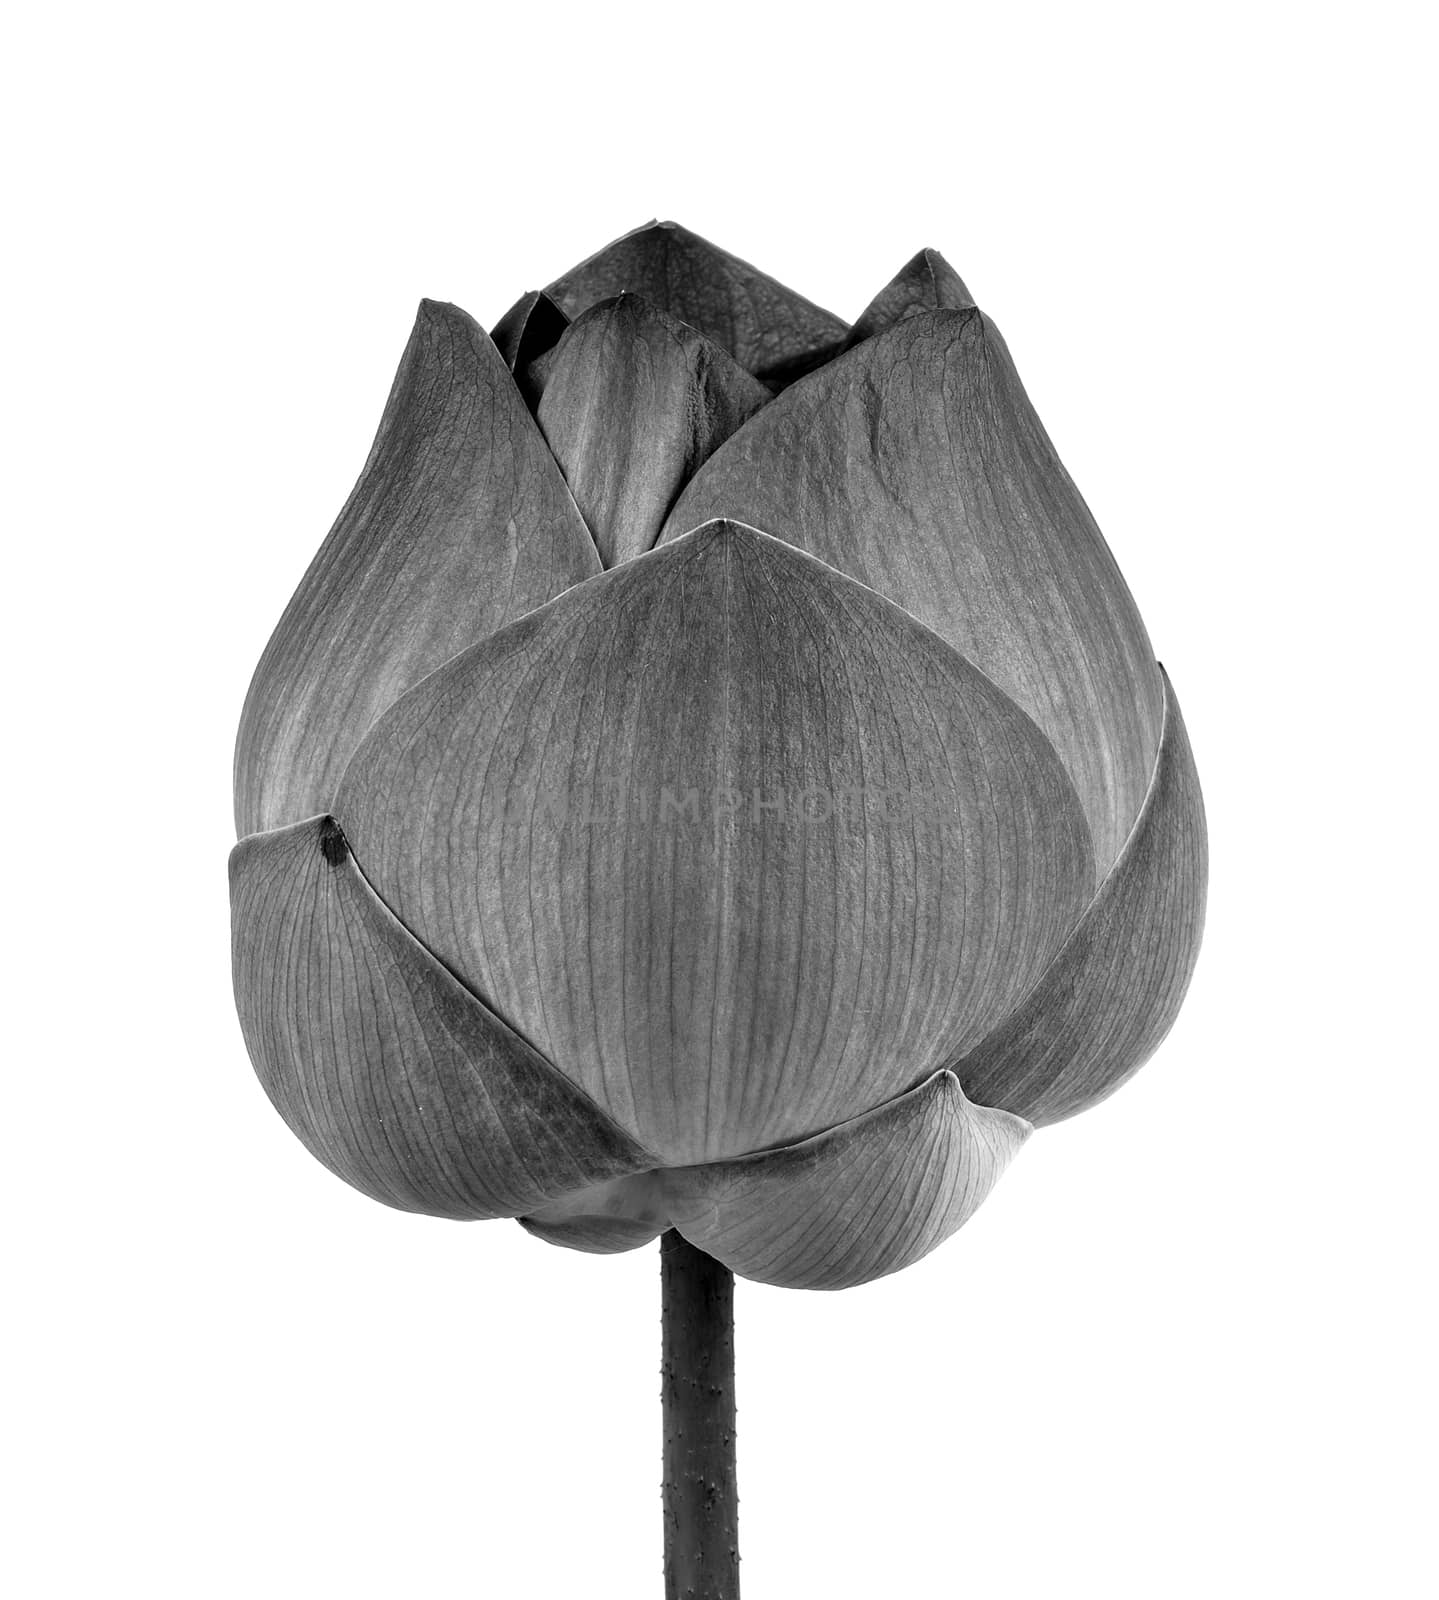 Lotus flower in black and white isolated on white background by sommai